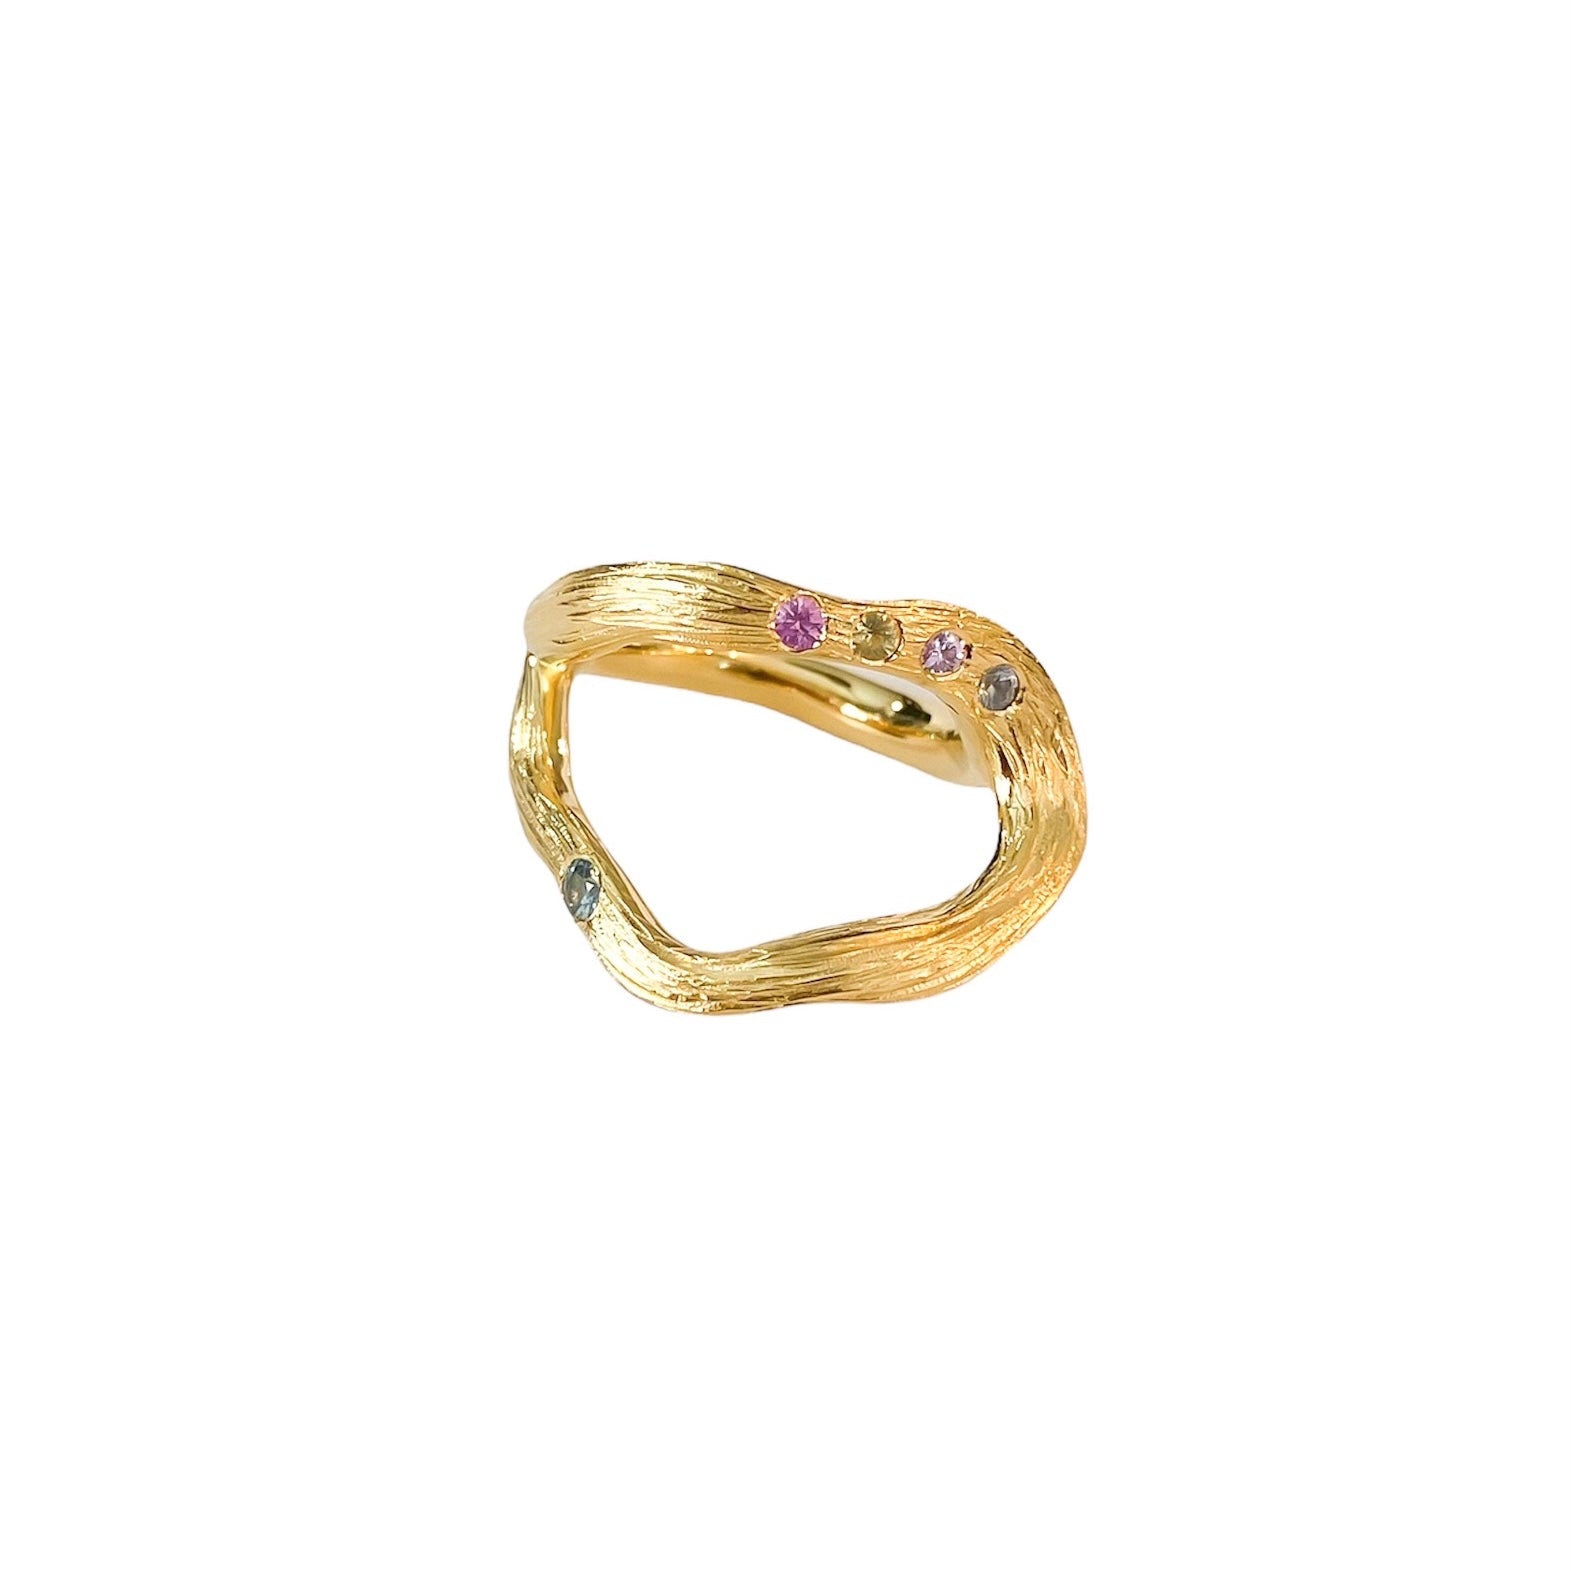 Simone Noa Oceania gold plated silver ring, right side view.